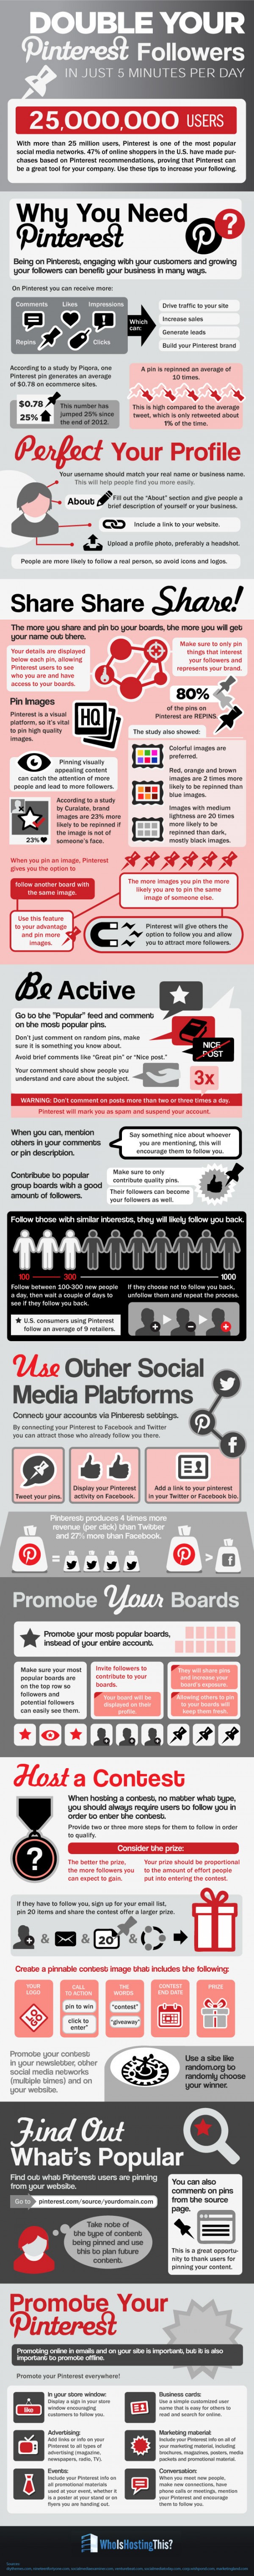 Infographic How To Double Your Pinterest Followers In 5 Minutes Per Day